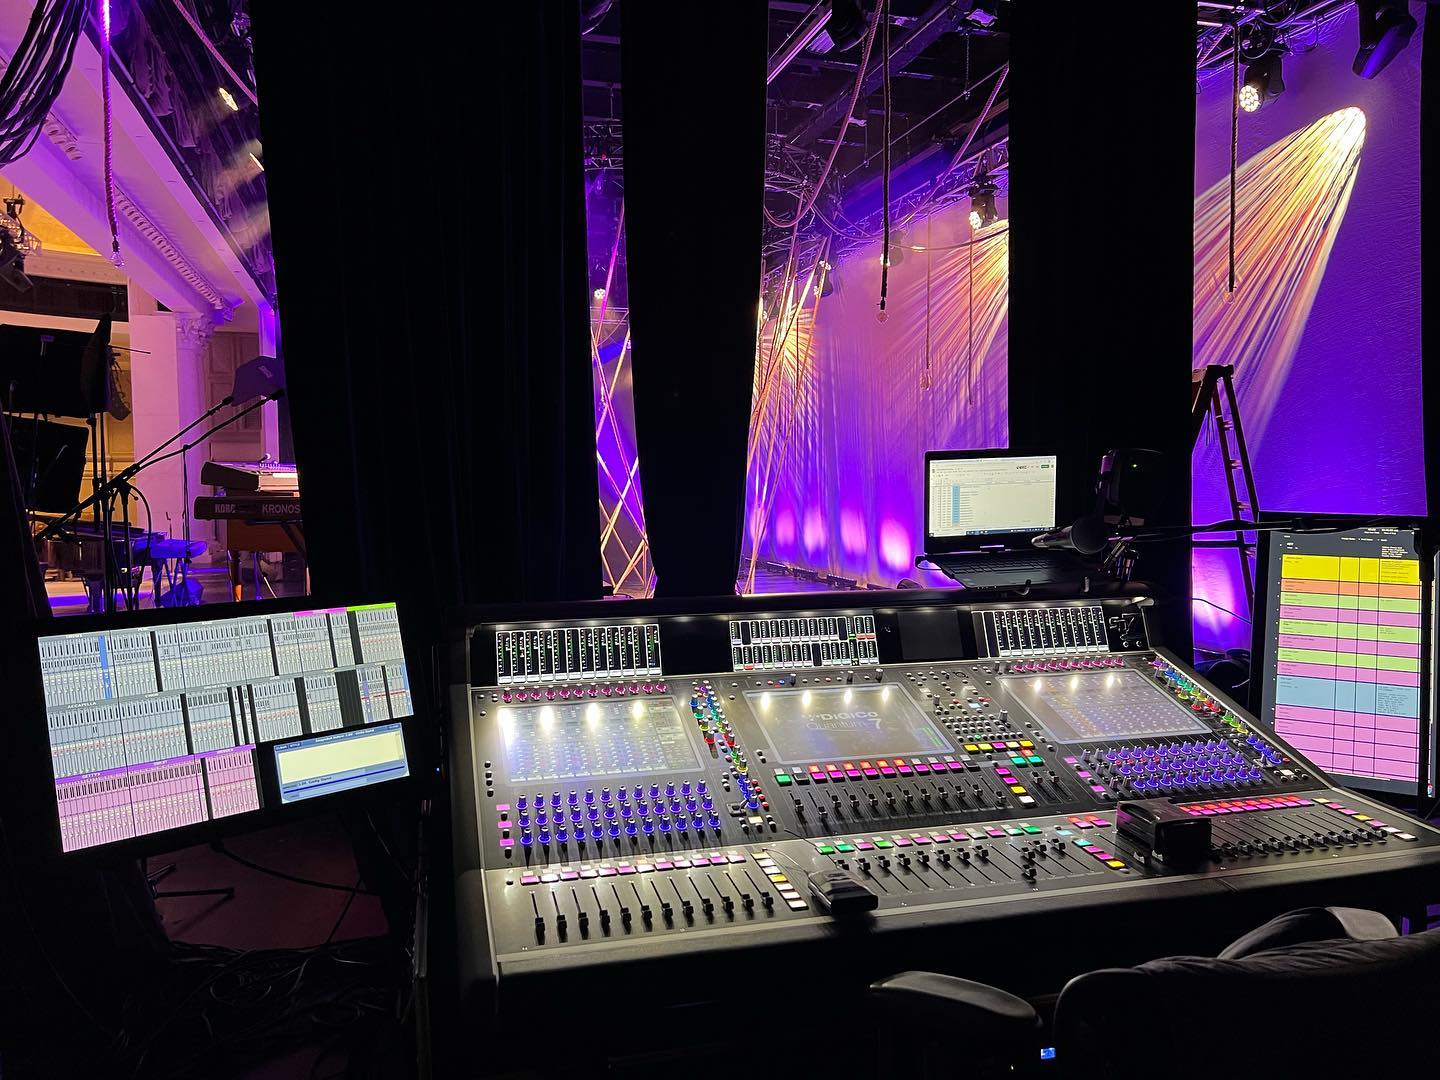 A sound mixing console with a view of a stage lit by warm stage lights, part of an event or concert setup.